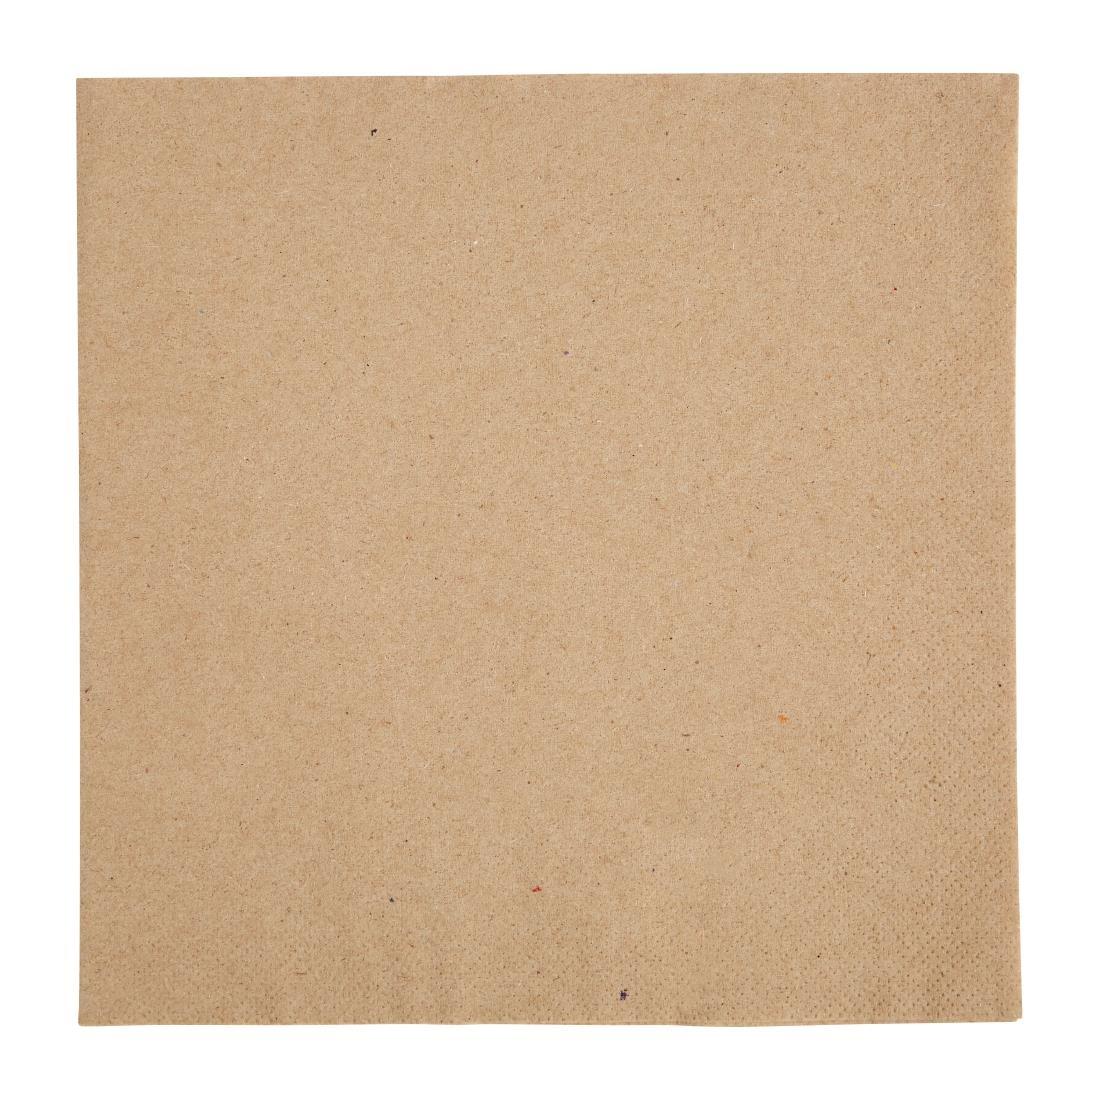 Fiesta Recyclable Recycled Dinner Napkin Kraft 40x40cm 2ply 1/4 Fold (Pack of 2000) - FE242  - 1